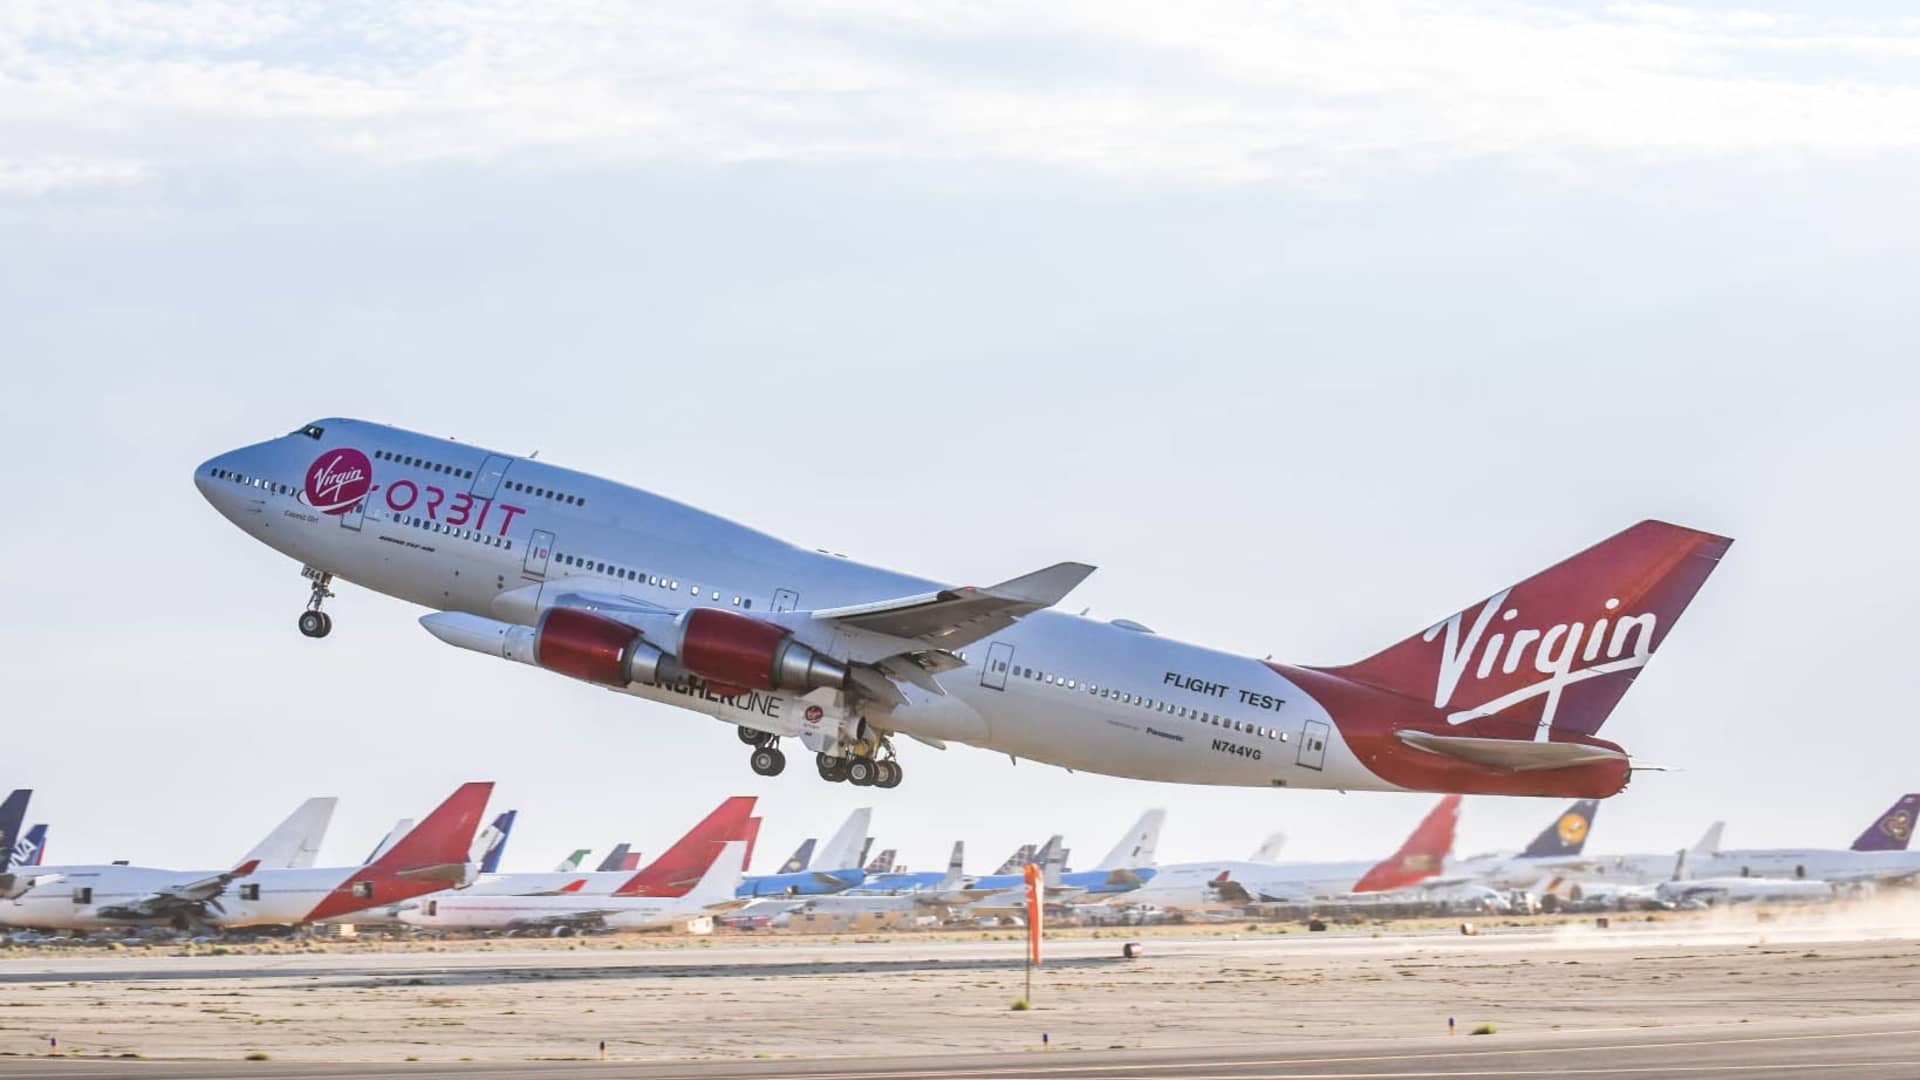 Virgin Orbit COO calls out company leadership for failures in goodbye memo. Read the full email